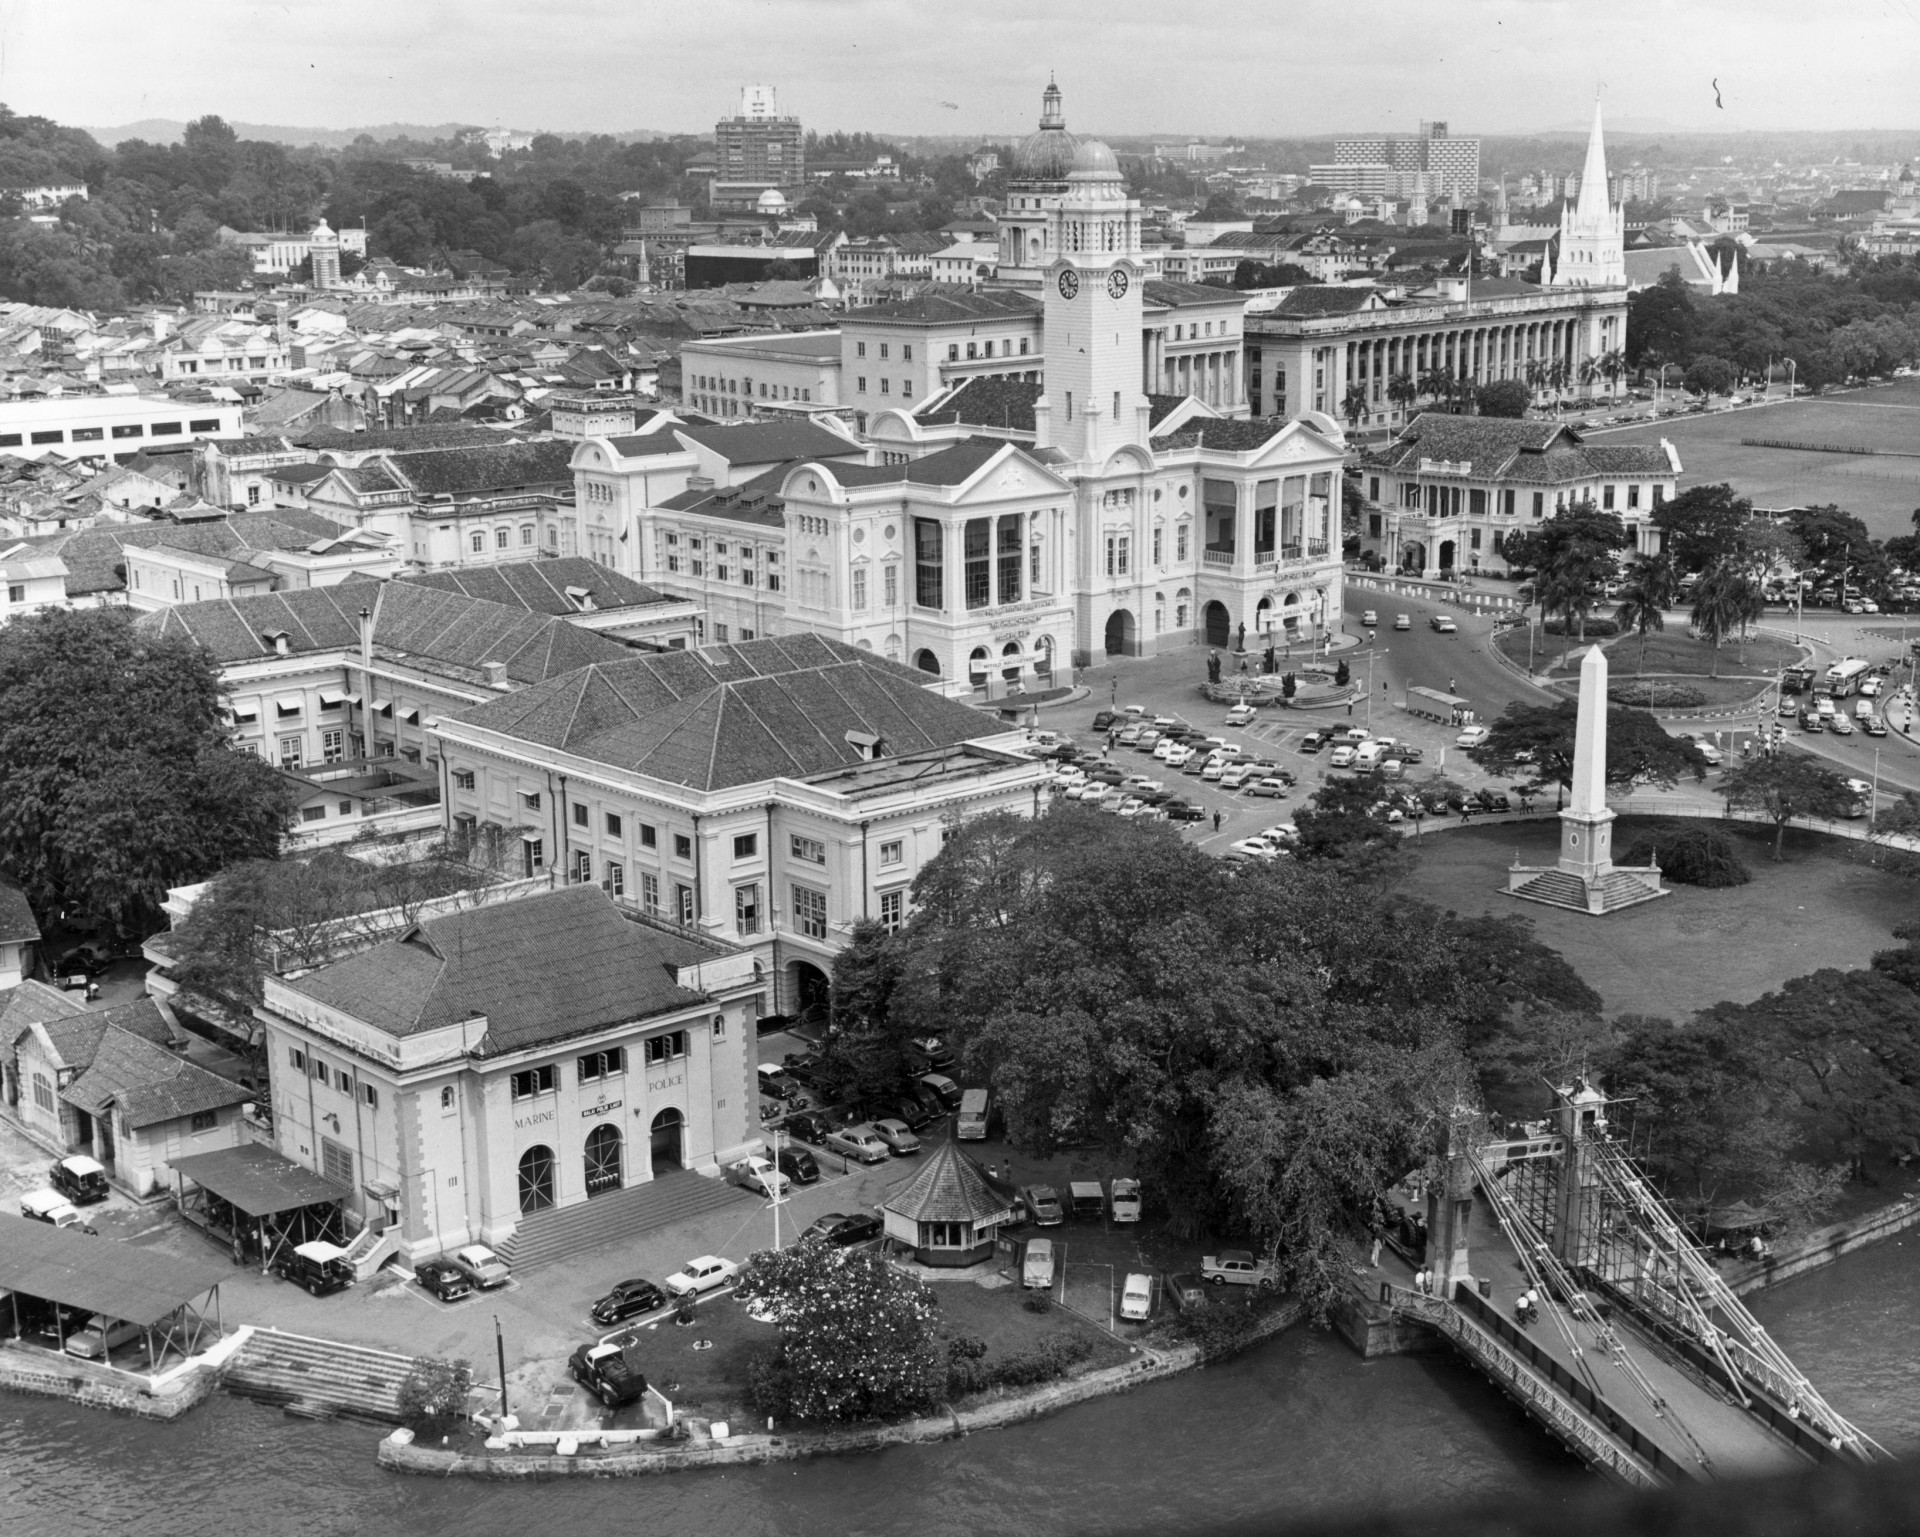 The southeast Asian city-state looked like this in 1950.<p><a href="https://www.msn.com/en-us/community/channel/vid-7xx8mnucu55yw63we9va2gwr7uihbxwc68fxqp25x6tg4ftibpra?cvid=94631541bc0f4f89bfd59158d696ad7e">Follow us and access great exclusive content every day</a></p>